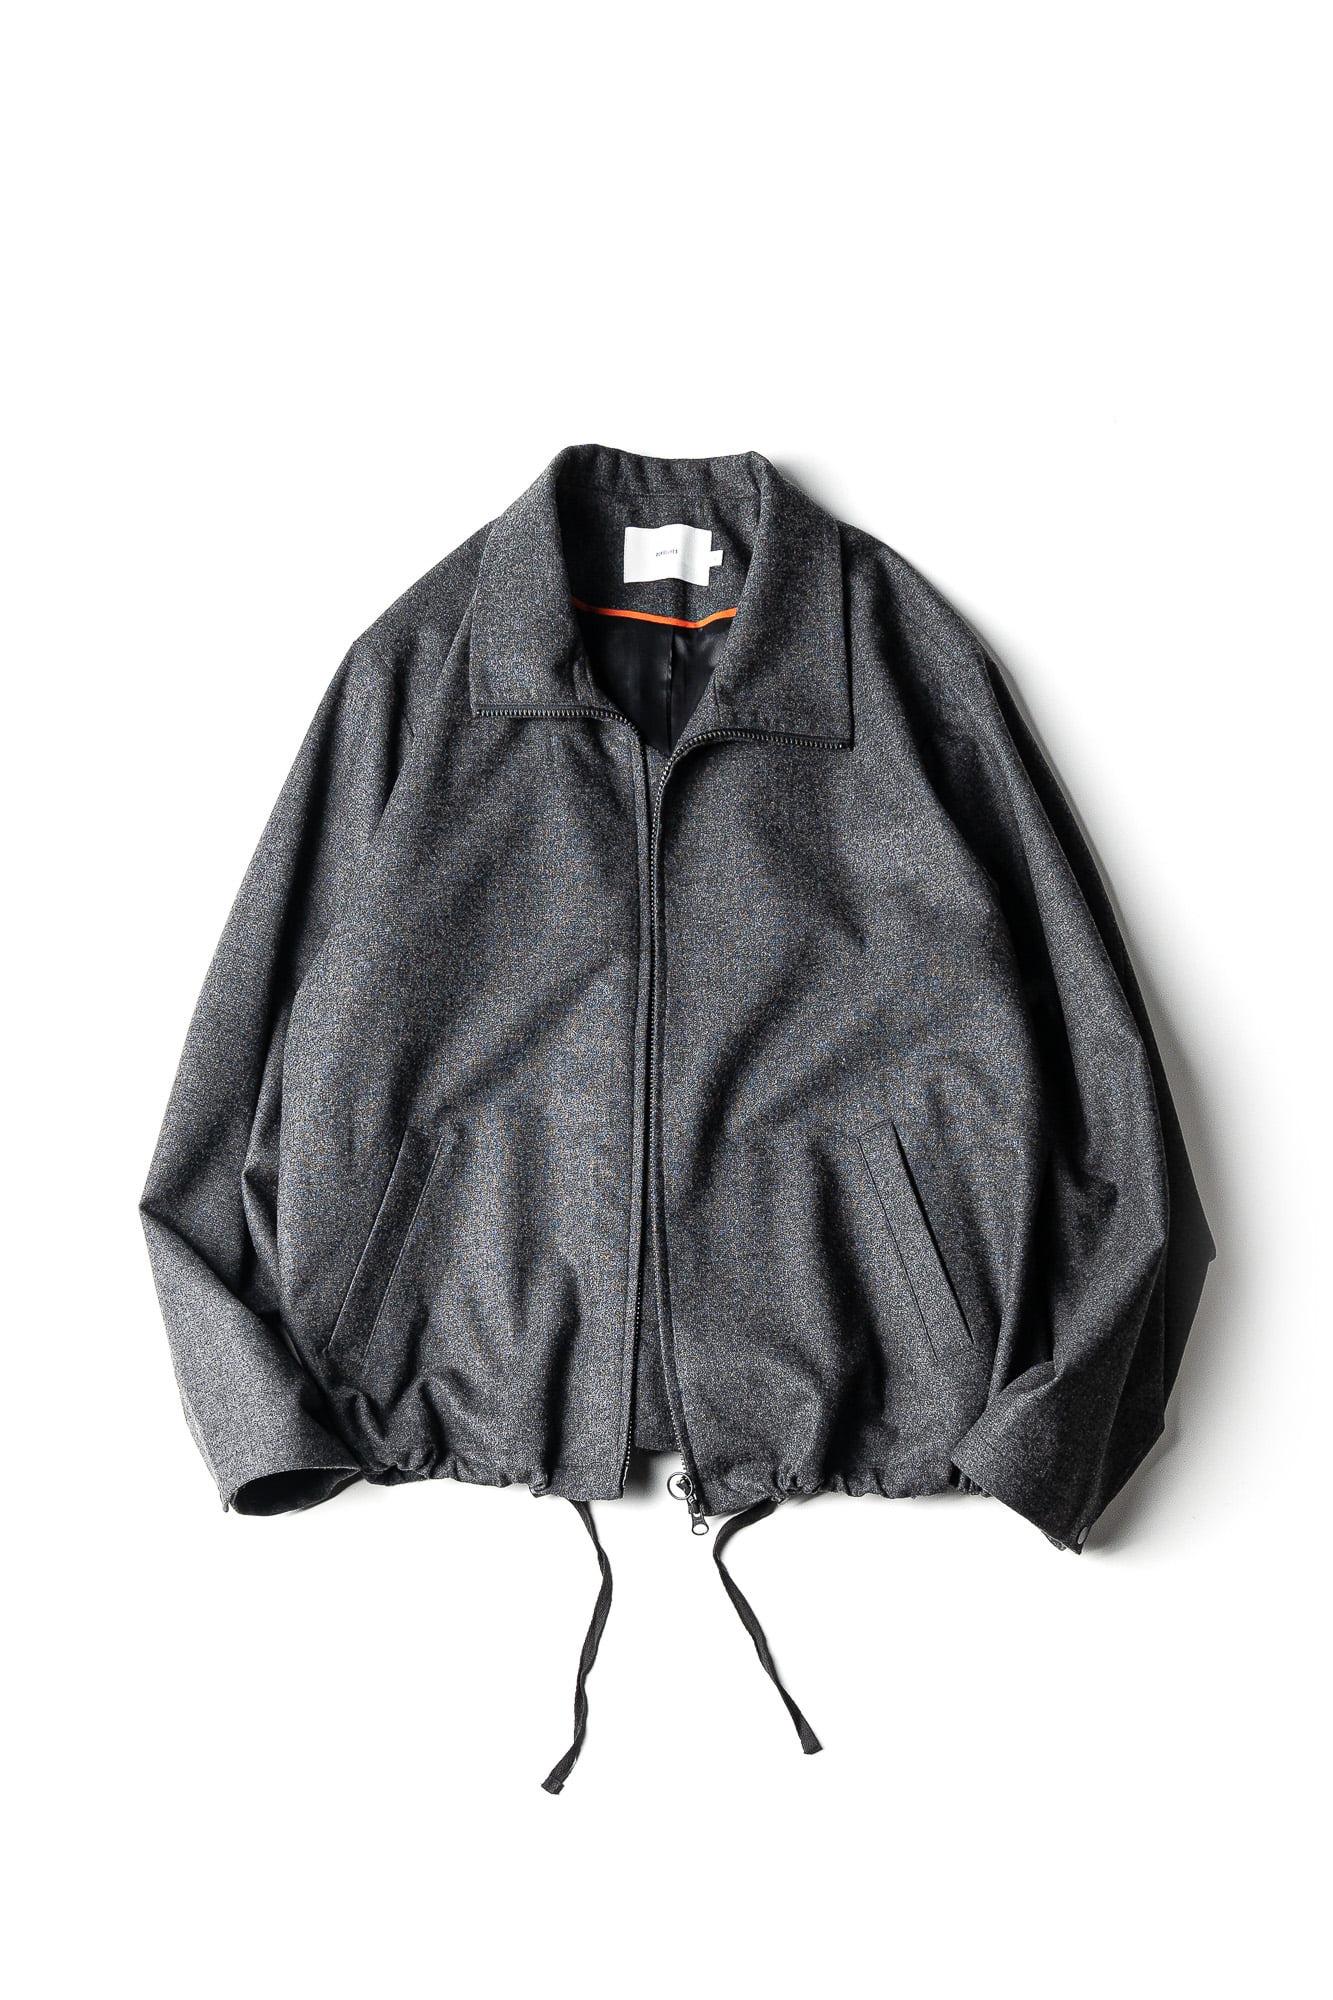 FINE WOOL RELAXED ZIP-UP BLOUSON - CHARCOAL